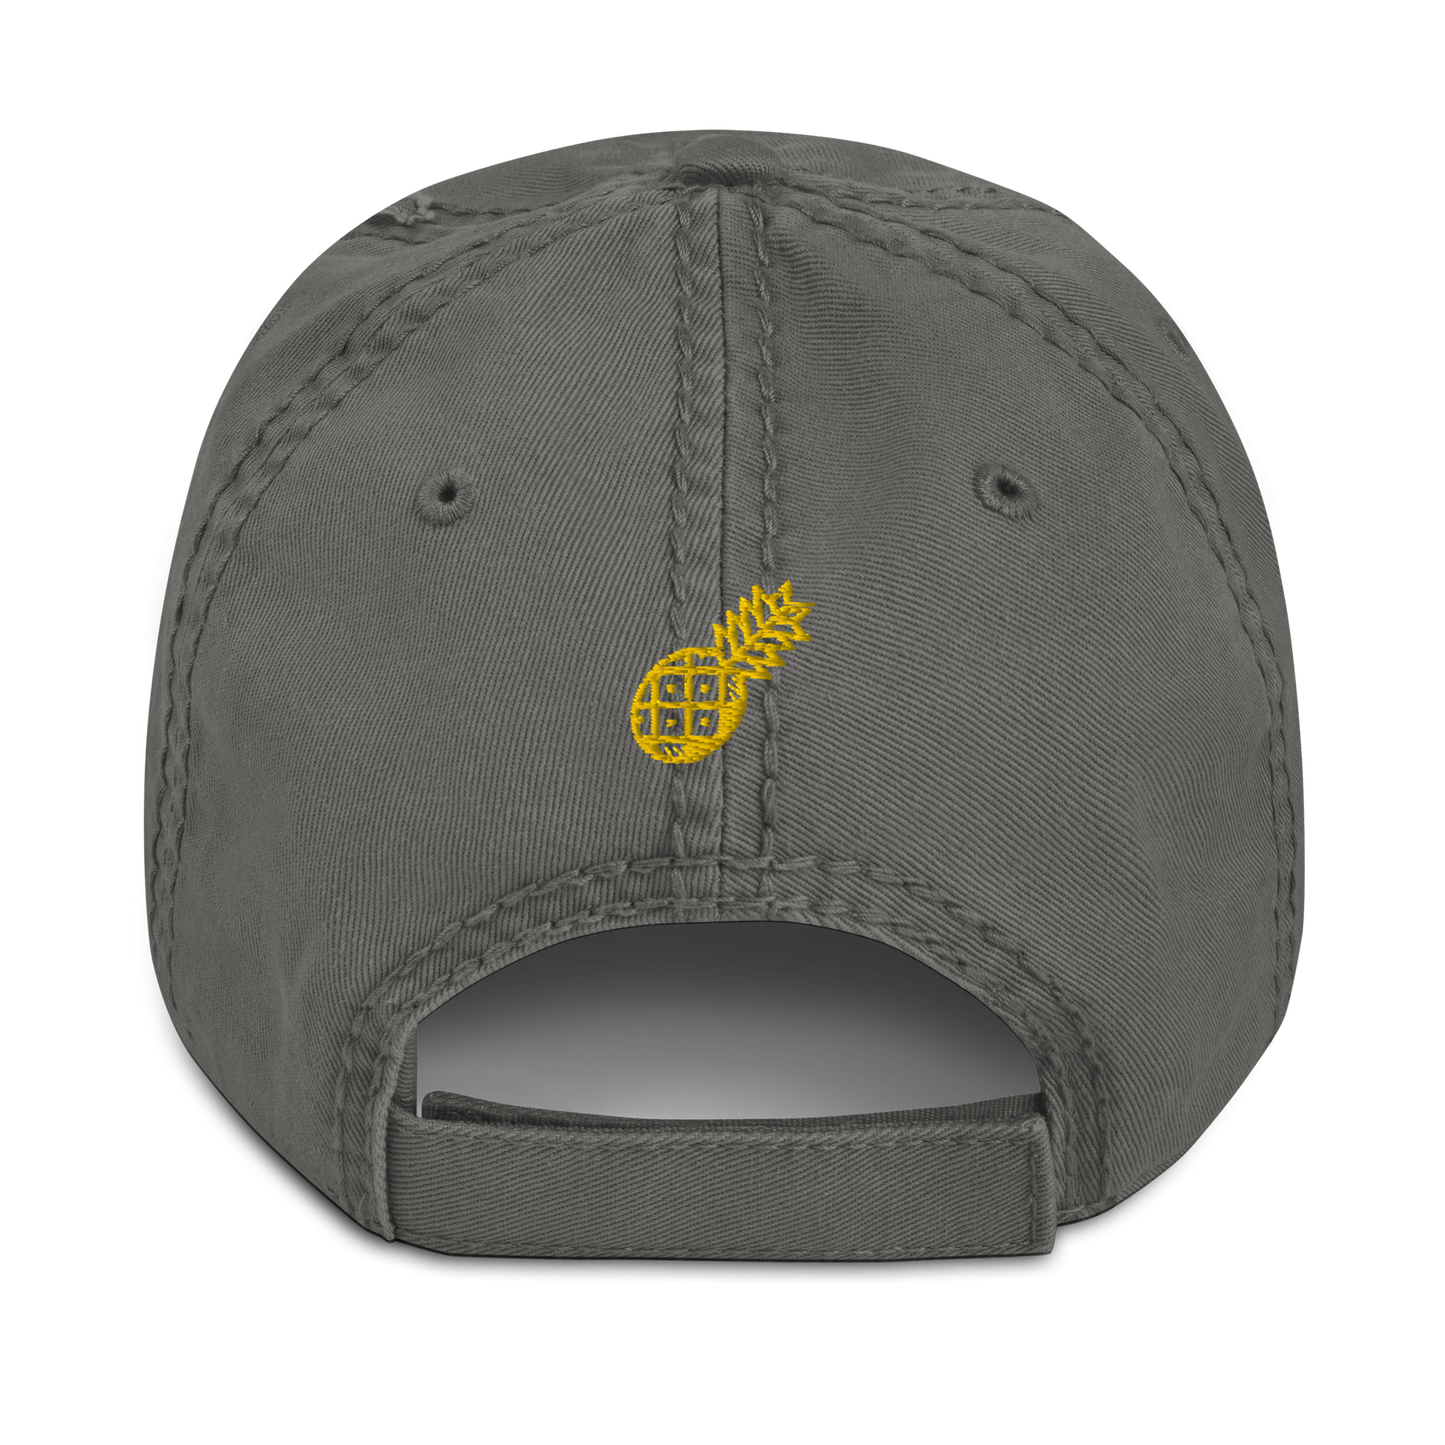 Africa Distressed Dad Hat